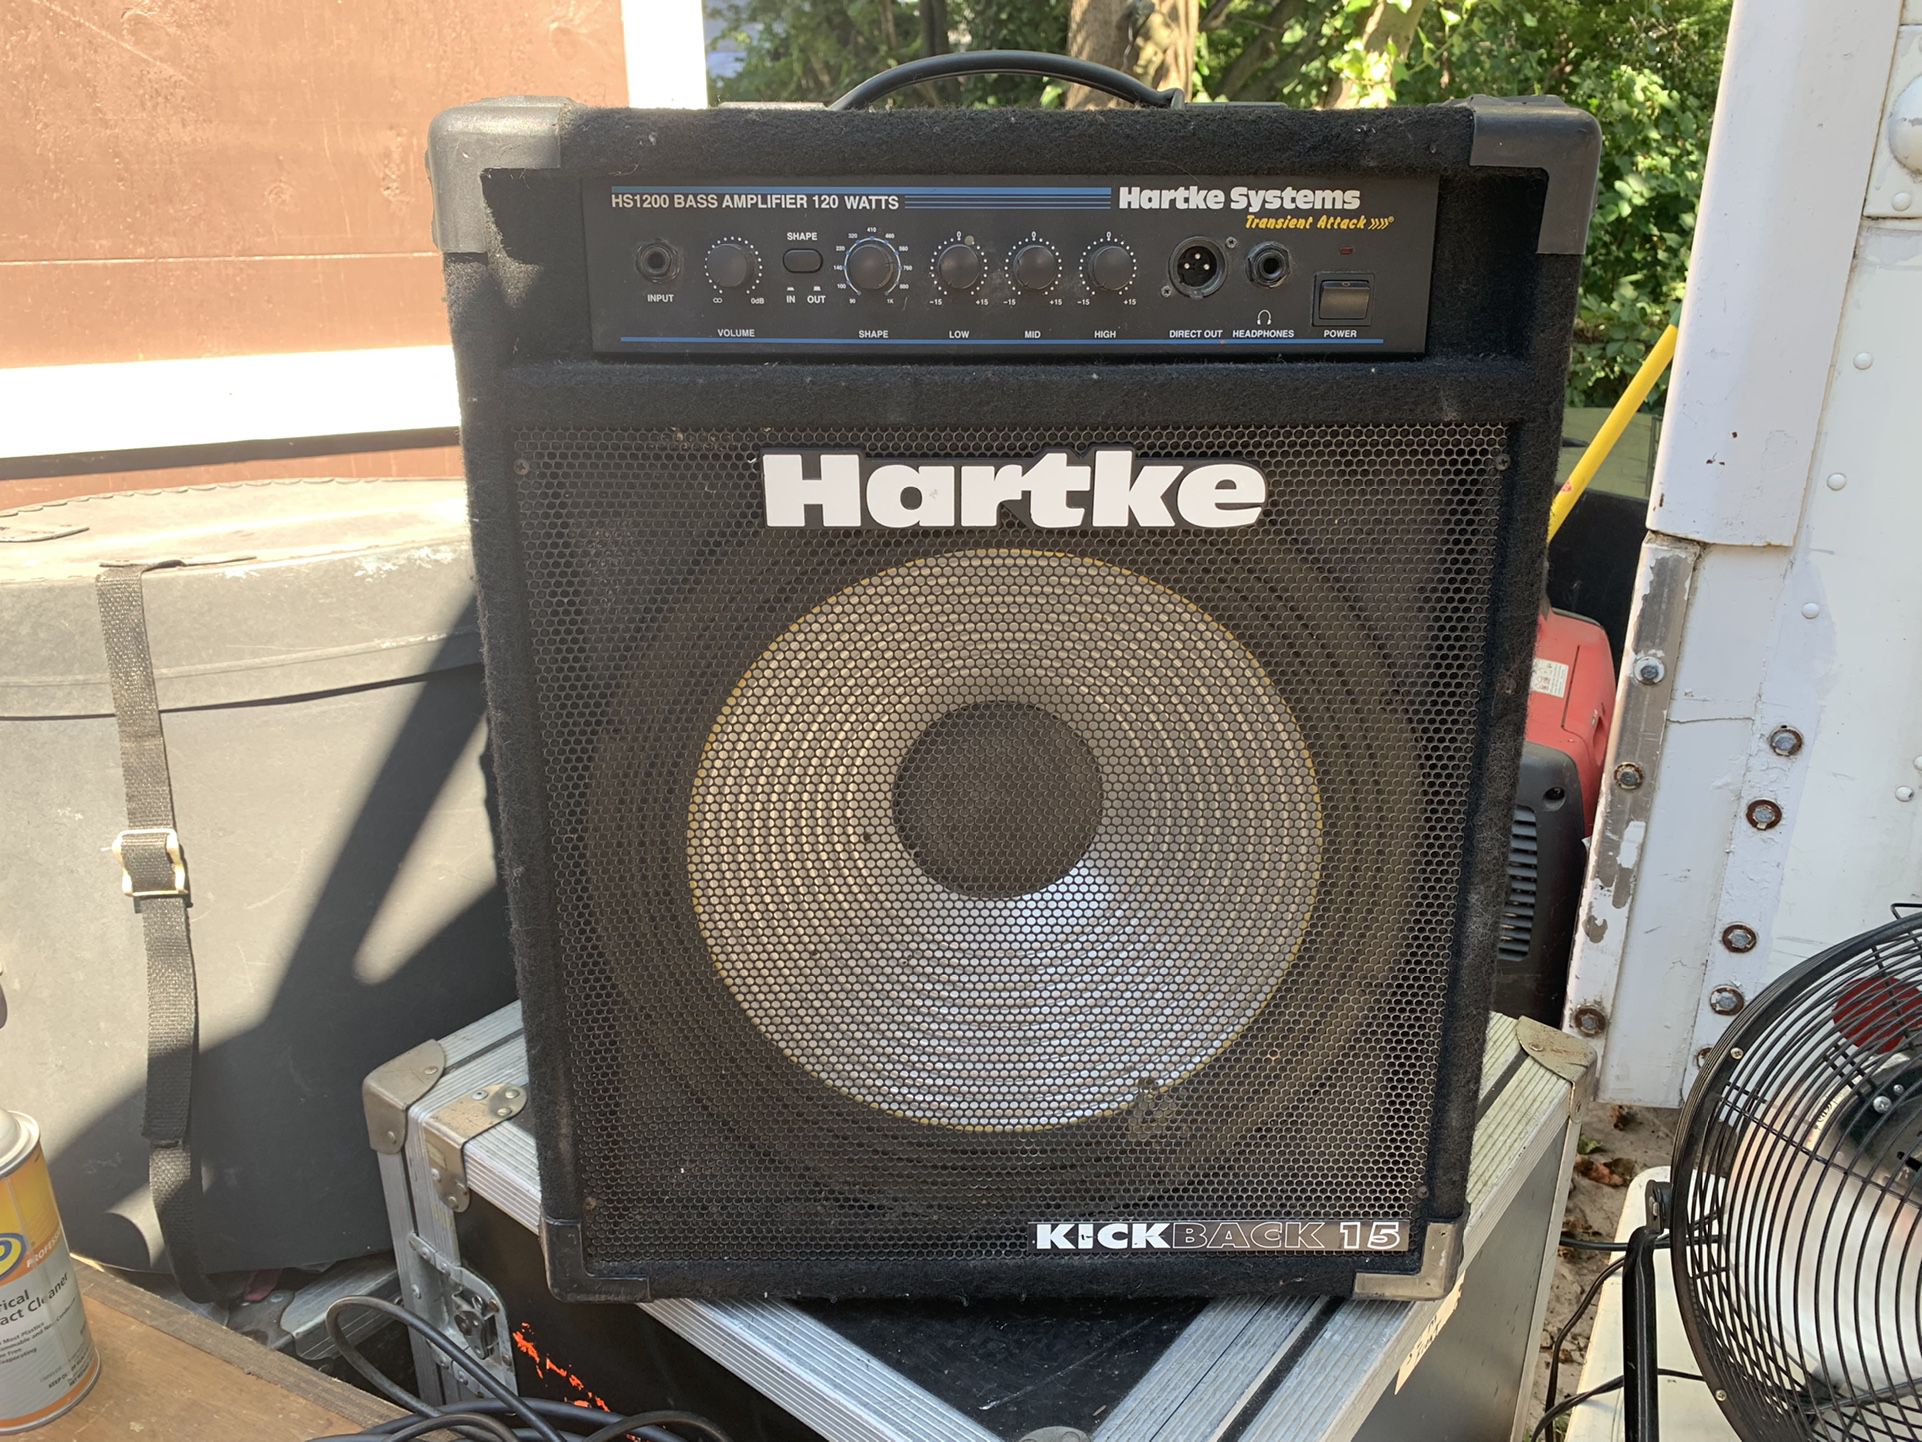 HARTKE HS1200 Bass Amp for Sale in Queens, NY - OfferUp